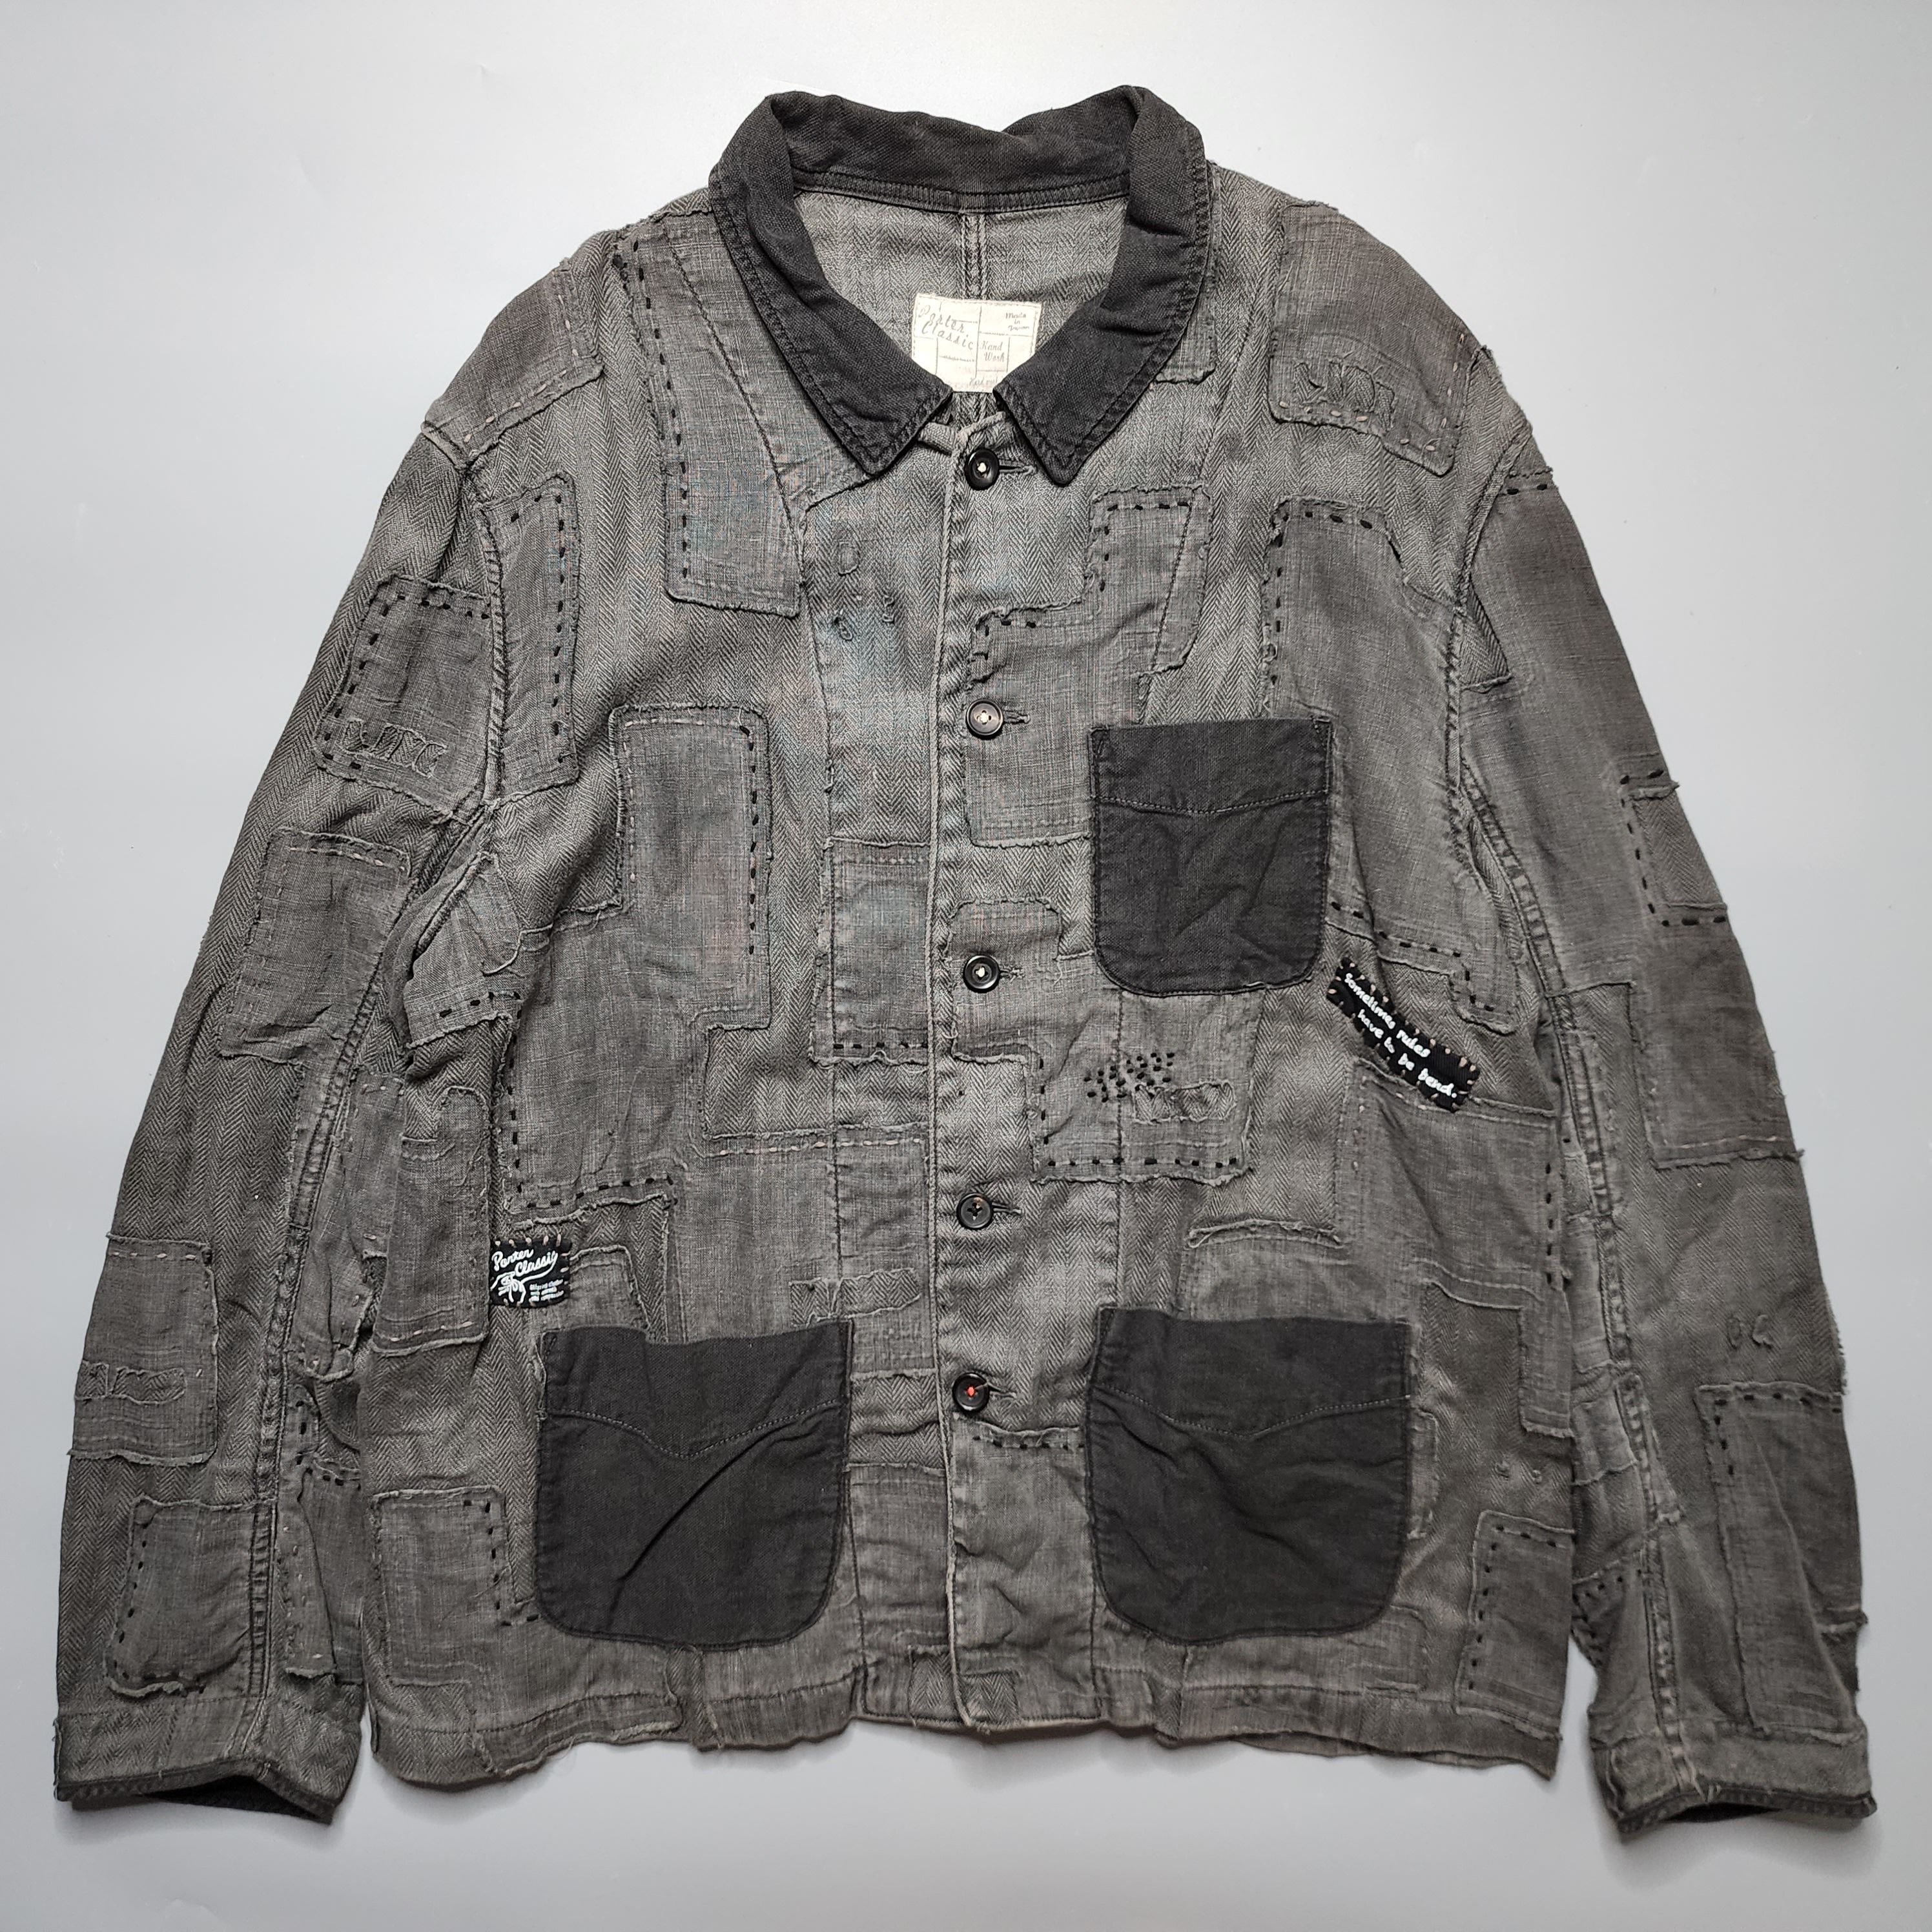 Porter Classic - SS13 Boro Patchwork French Work Jacket - 1